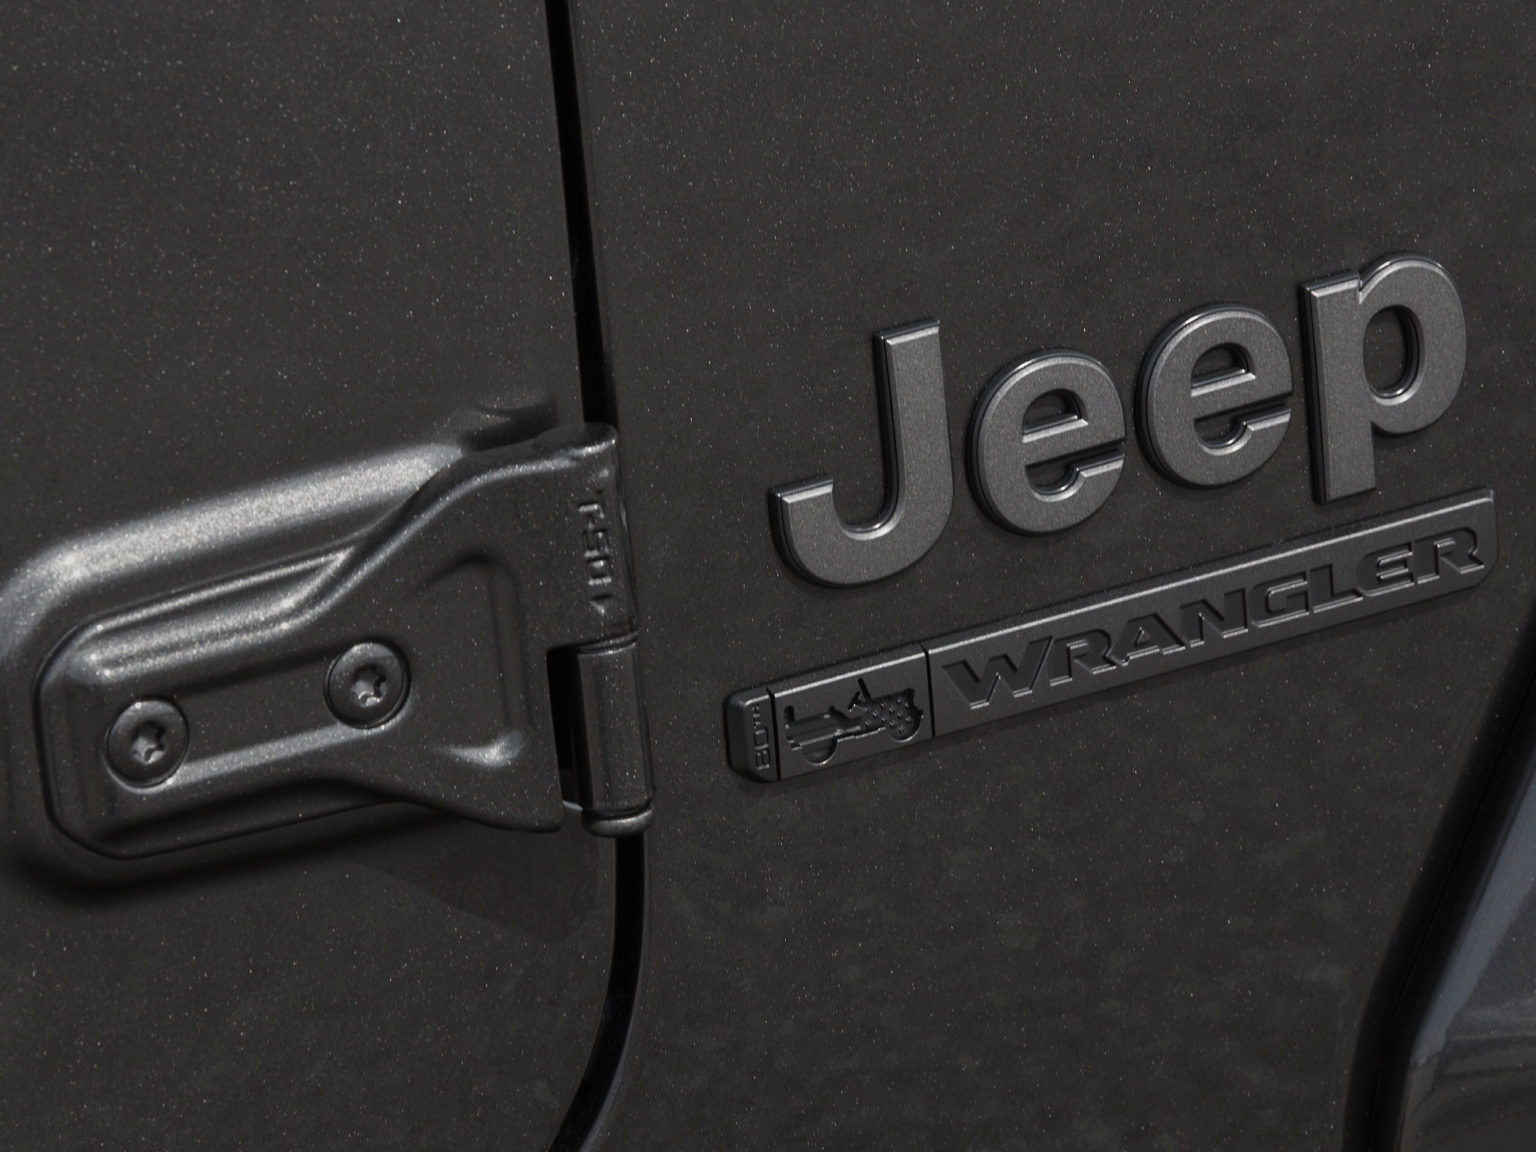 Jeep is extending its customer care program for the 2021 model year.